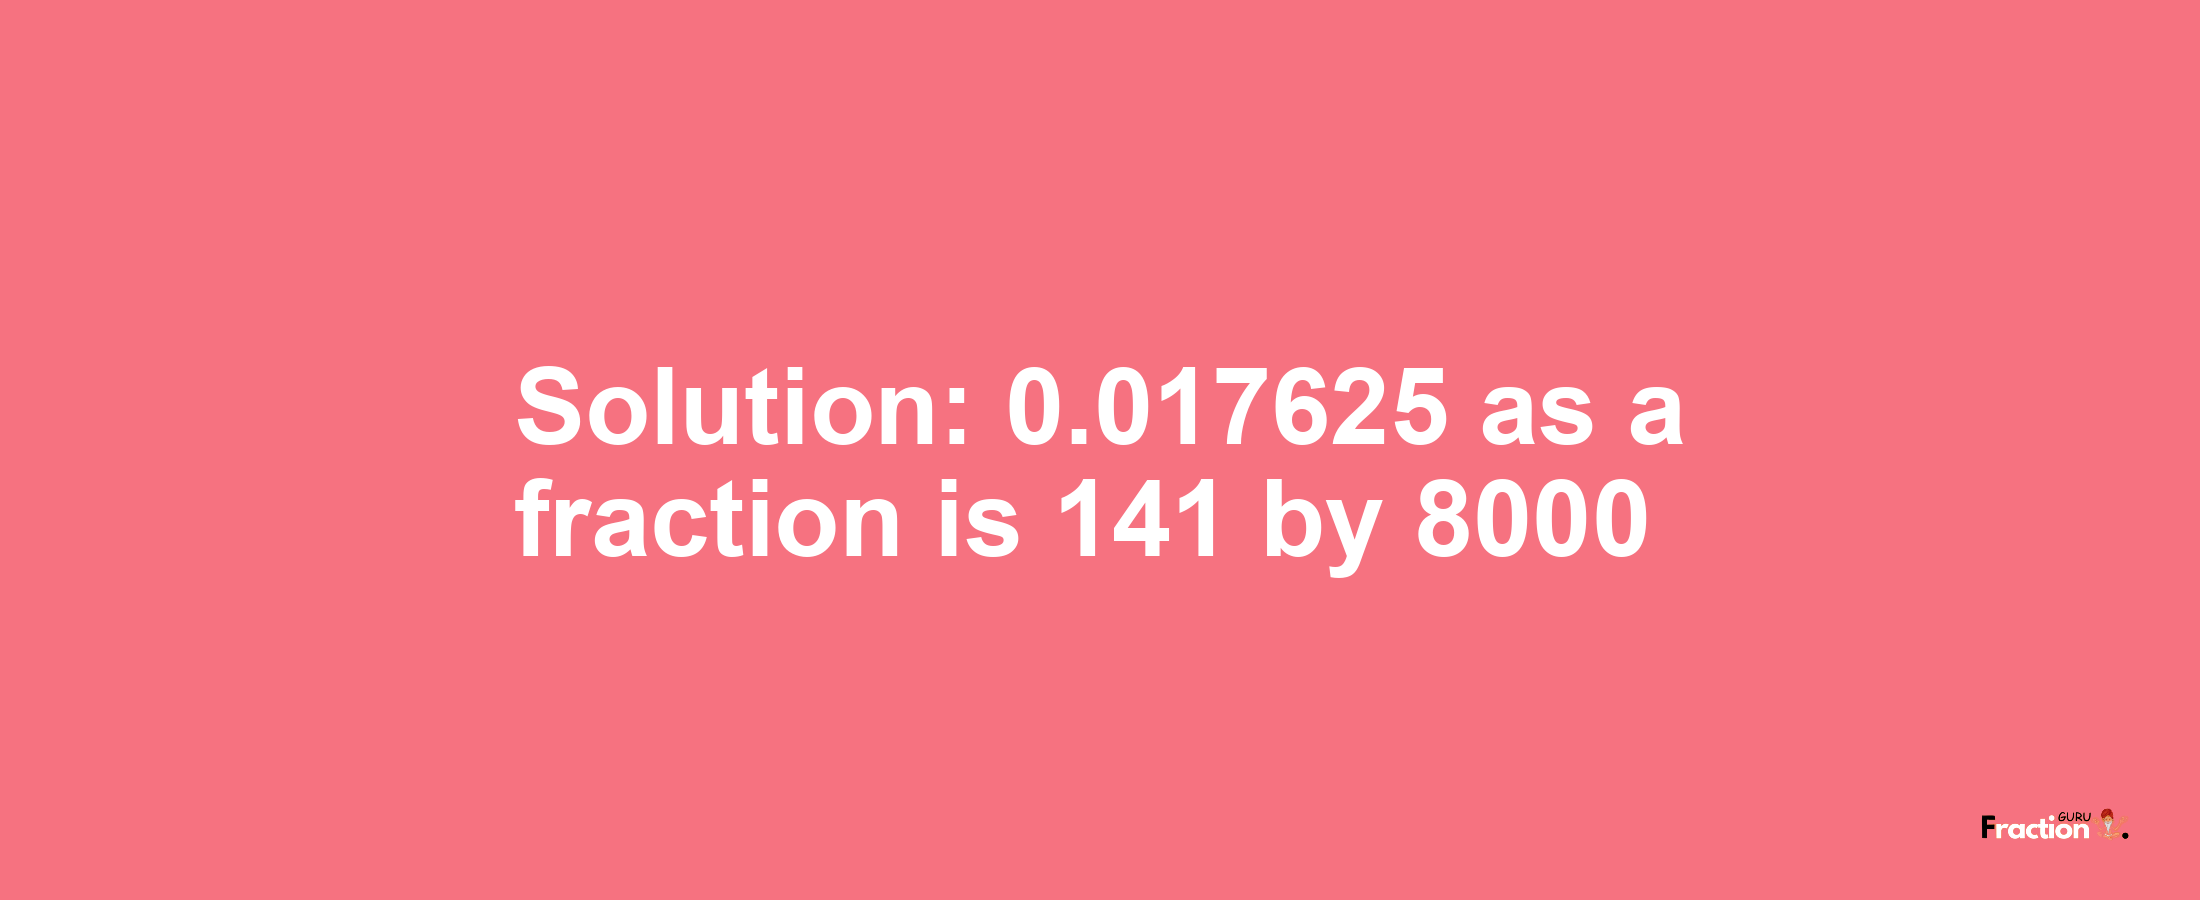 Solution:0.017625 as a fraction is 141/8000